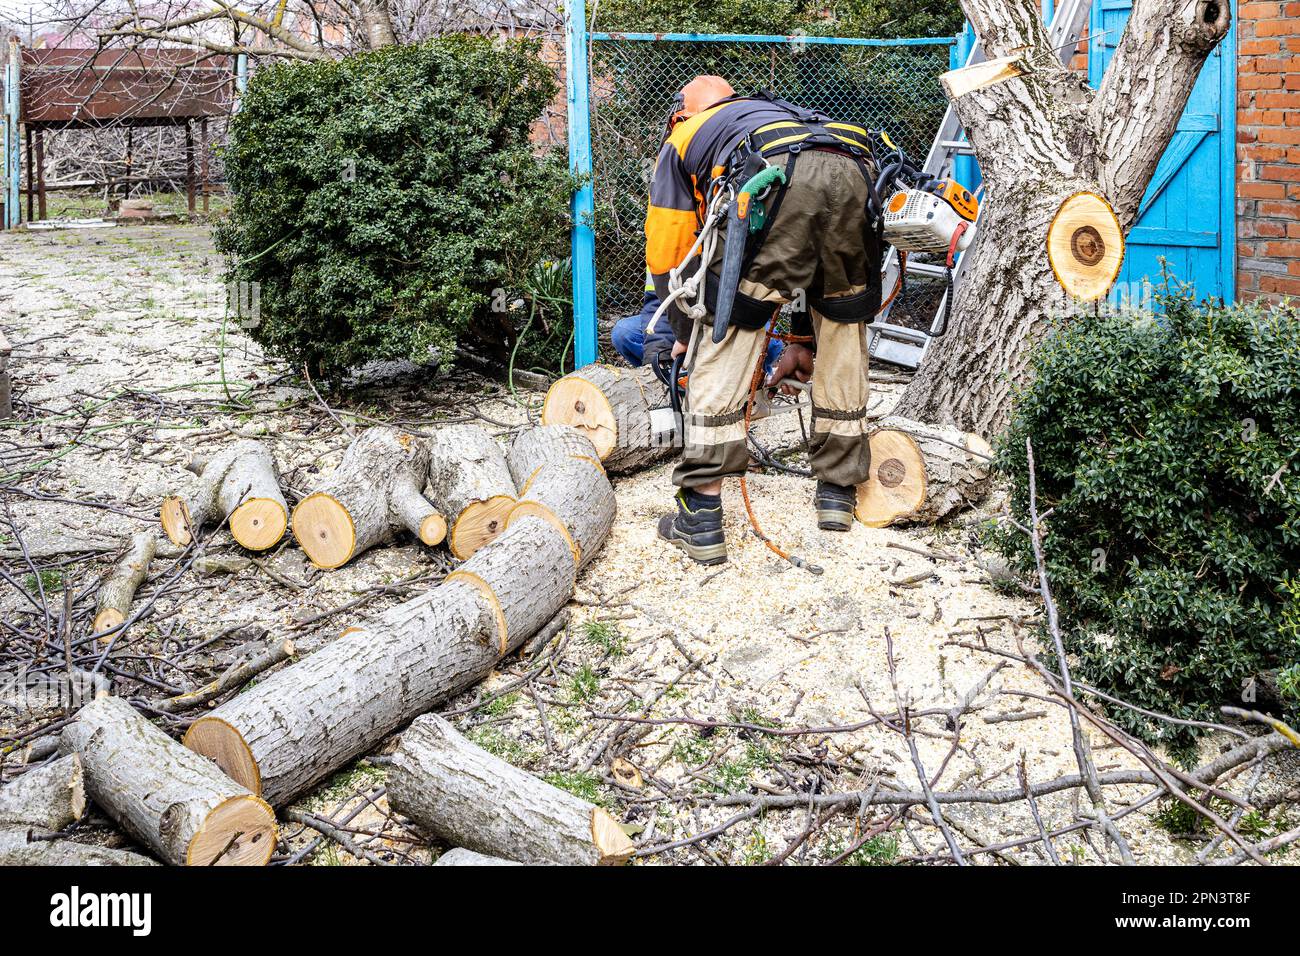 workers sawing old walnut tree in backyard of country house Stock Photo